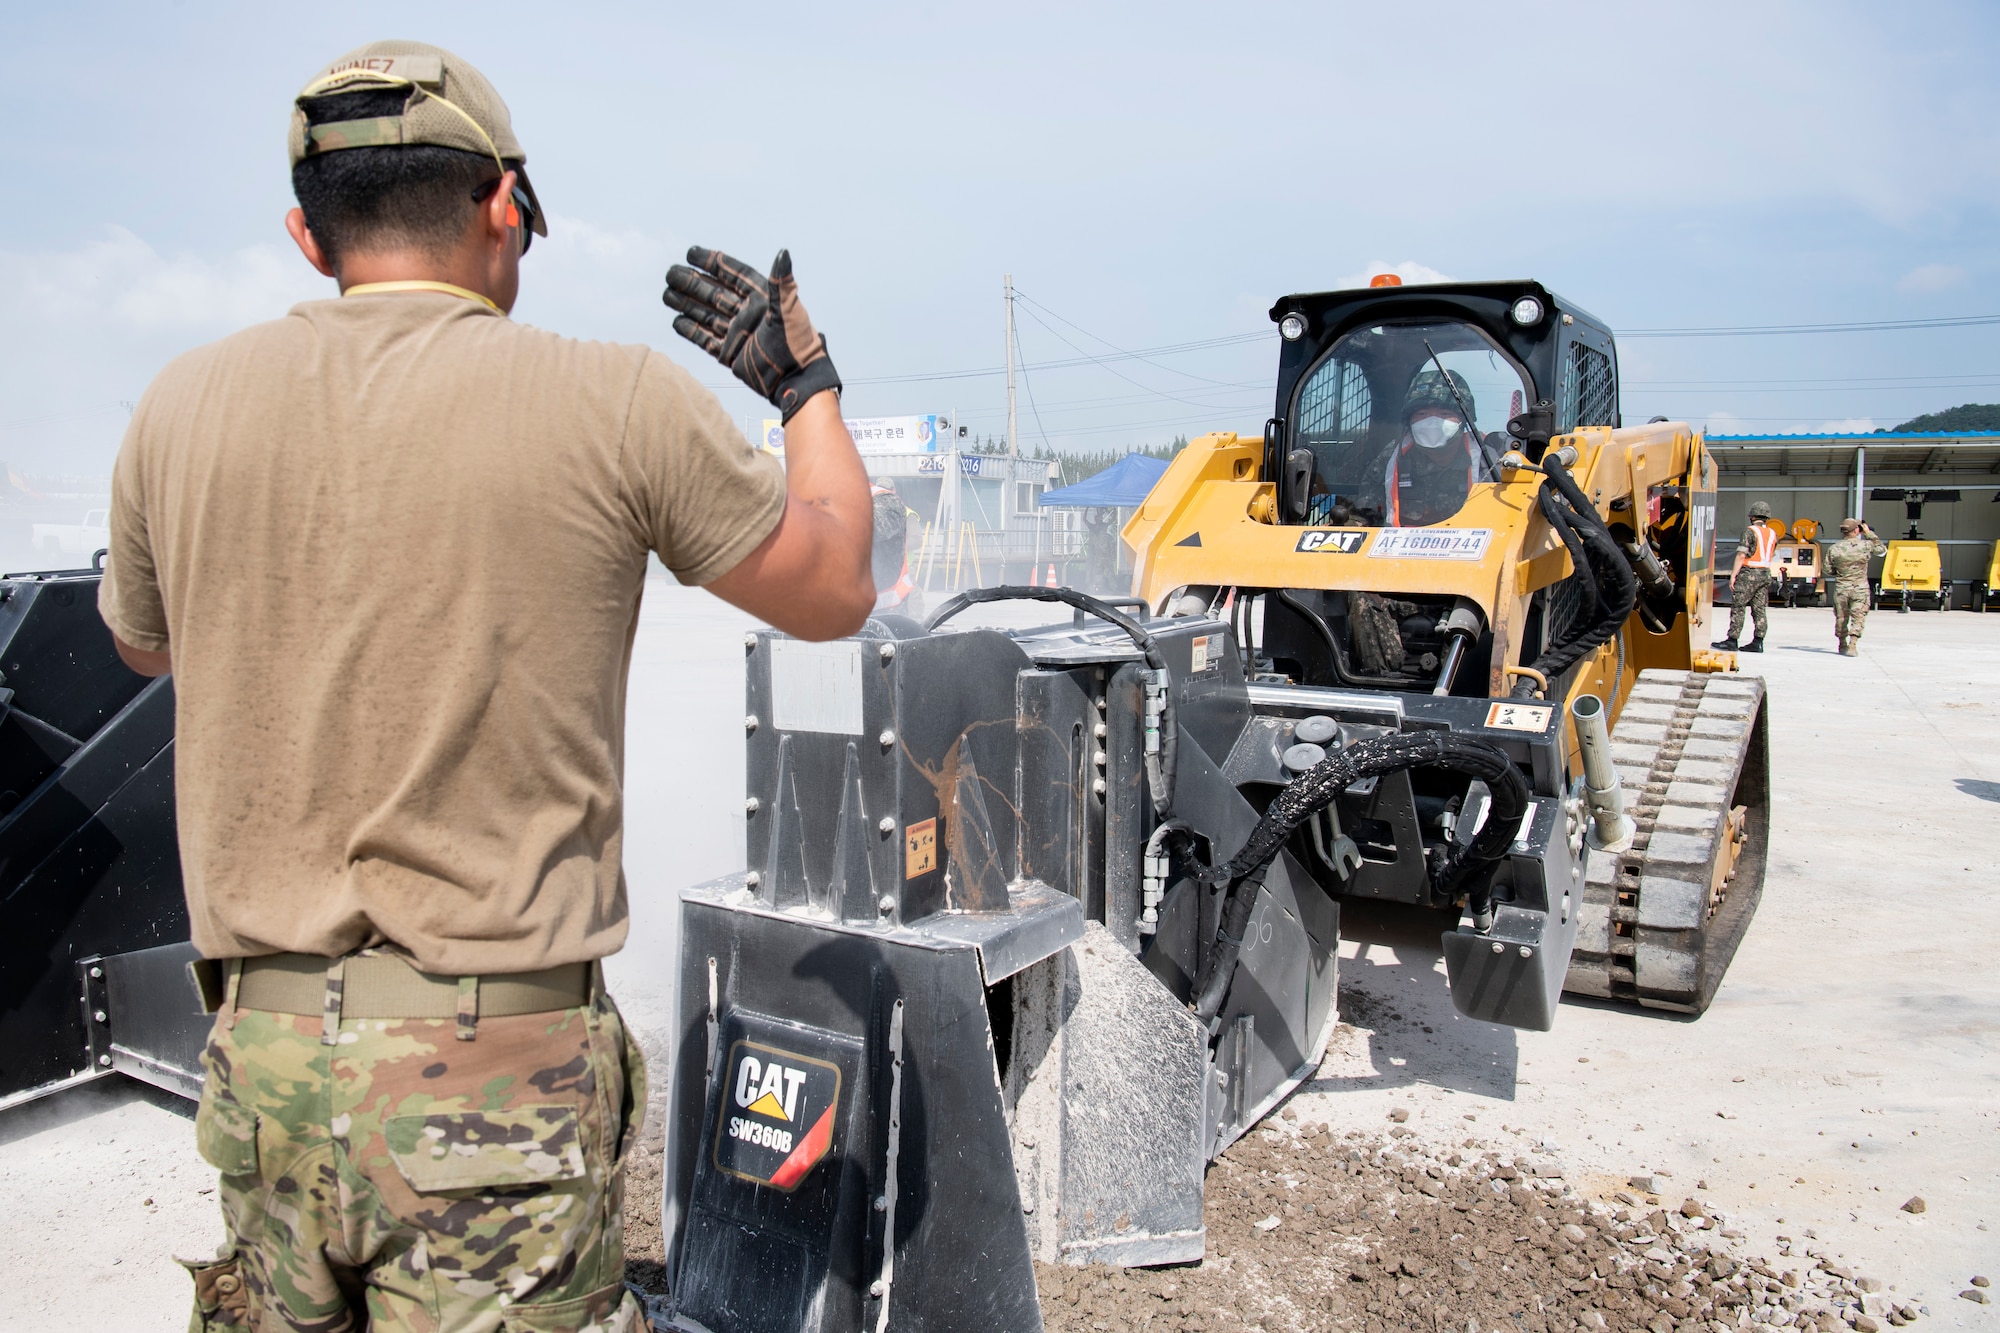 U.S. Air Force Senior Airman Sebastian Nunez, an Operations Management Journeyman, directs a member of the Republic of Korea Air Force operating a Compact Track Loader with saw attachment during rapid airfield damage repair training, July 19, 2022 at Gwangju Air Base, Republic of Korea.